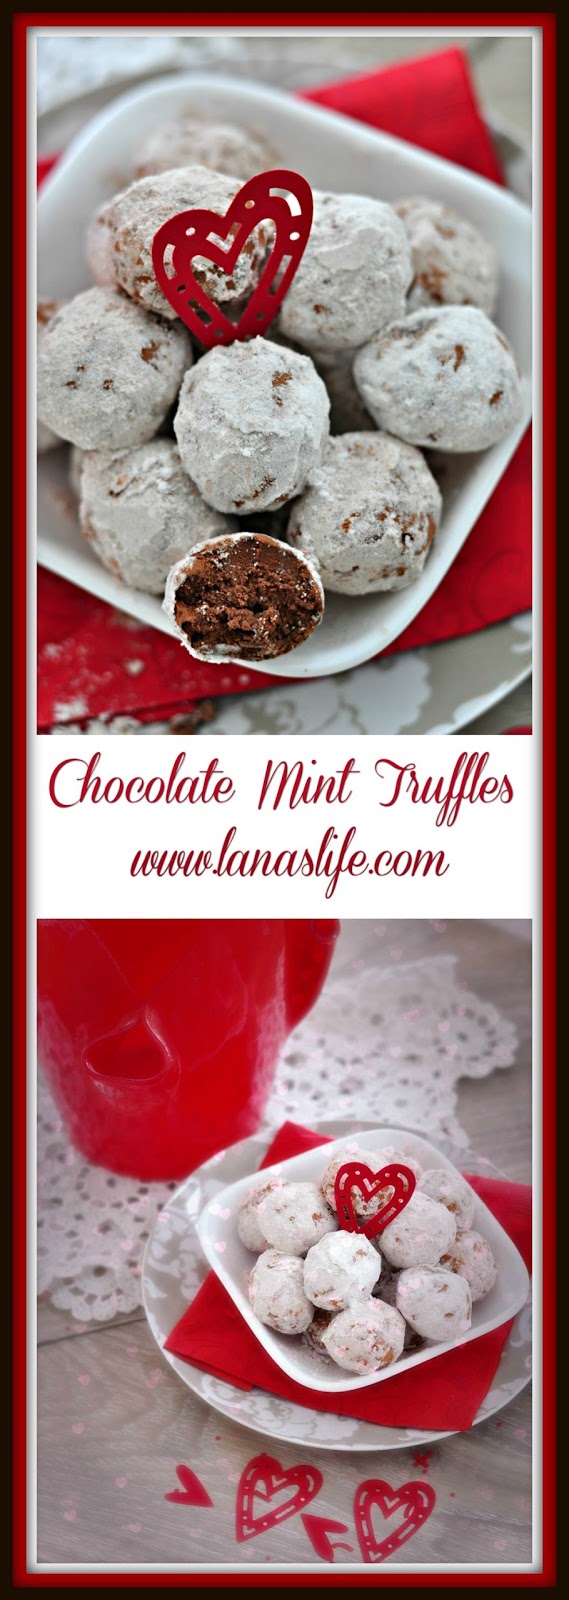 Whatever your answer is, this recipe for Chocolate Mint Truffles is one that will make you all happy because you can adjust the type of chocolate to your preference.  It's also so ~tinkin' easy to make that you can leave this recipe out and your kiddos and even your husband can make them for their favorite Valentine, that's YOU, without any worries in the kitchen.  It's a pretty much no-fail recipe!